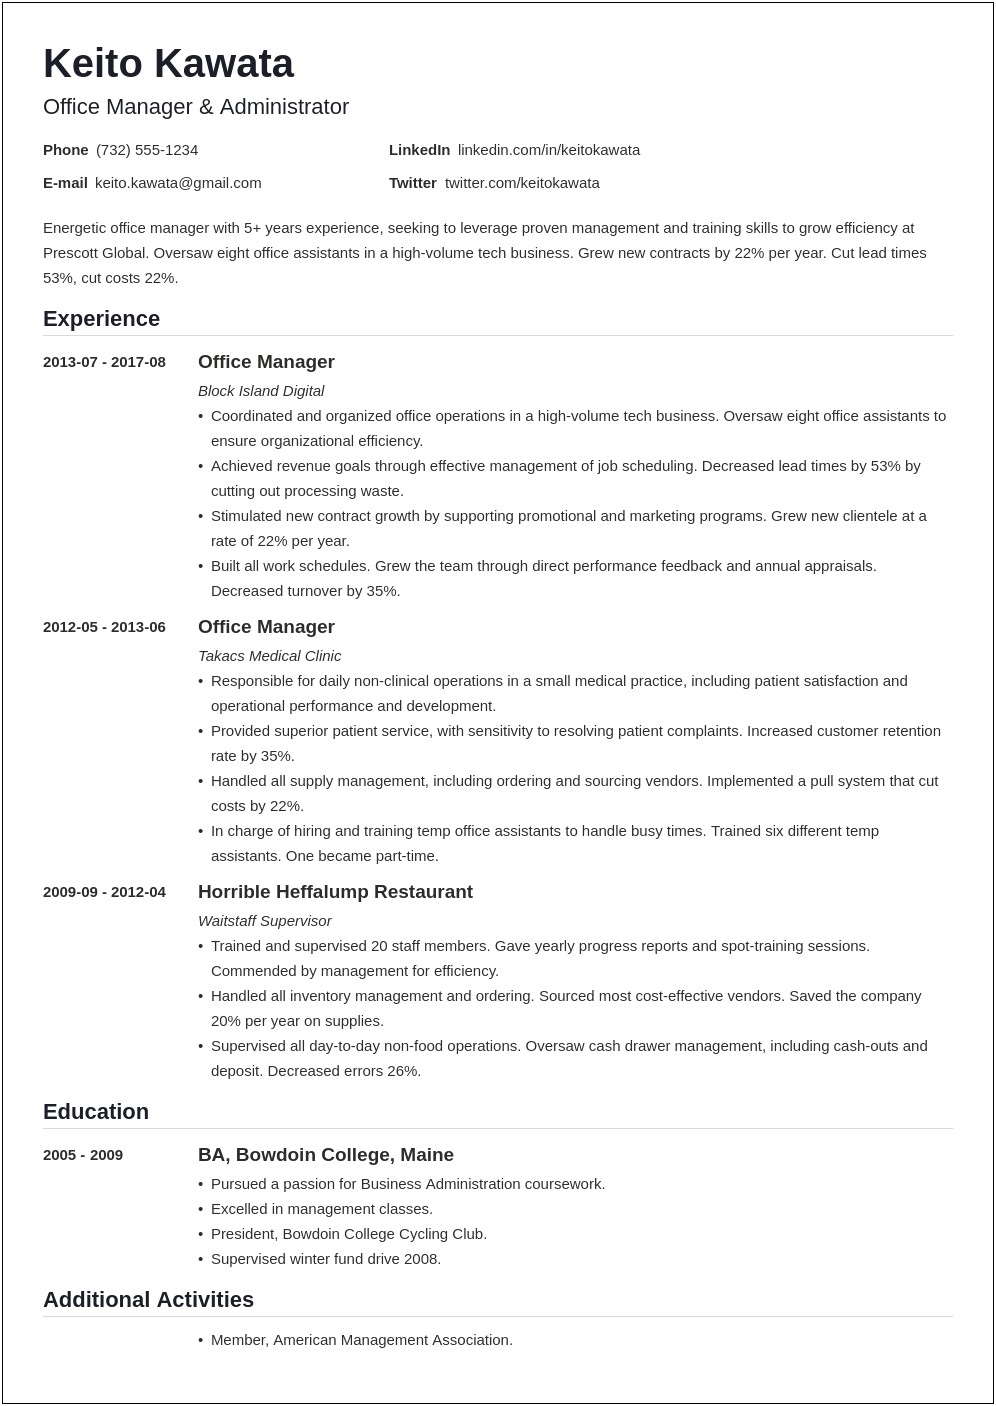 Resume Heading Examples For Chiropractic Assistant Receptionist